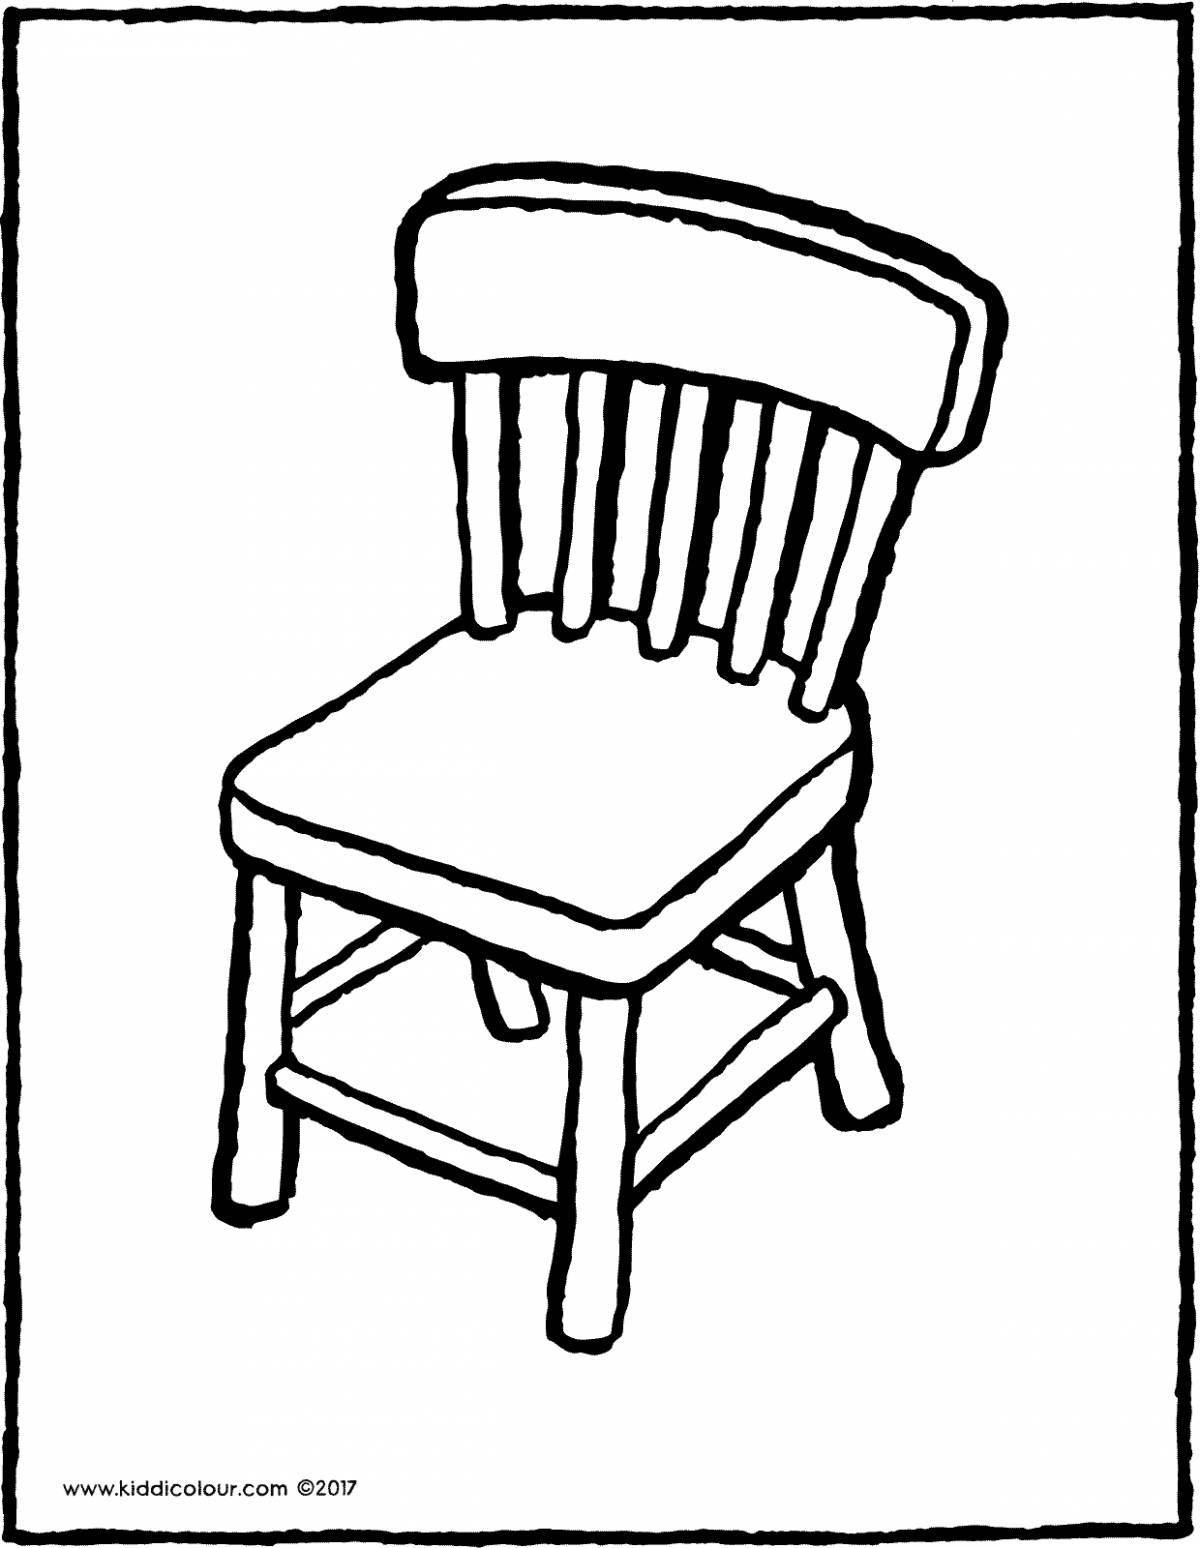 Coloring page cute high chair